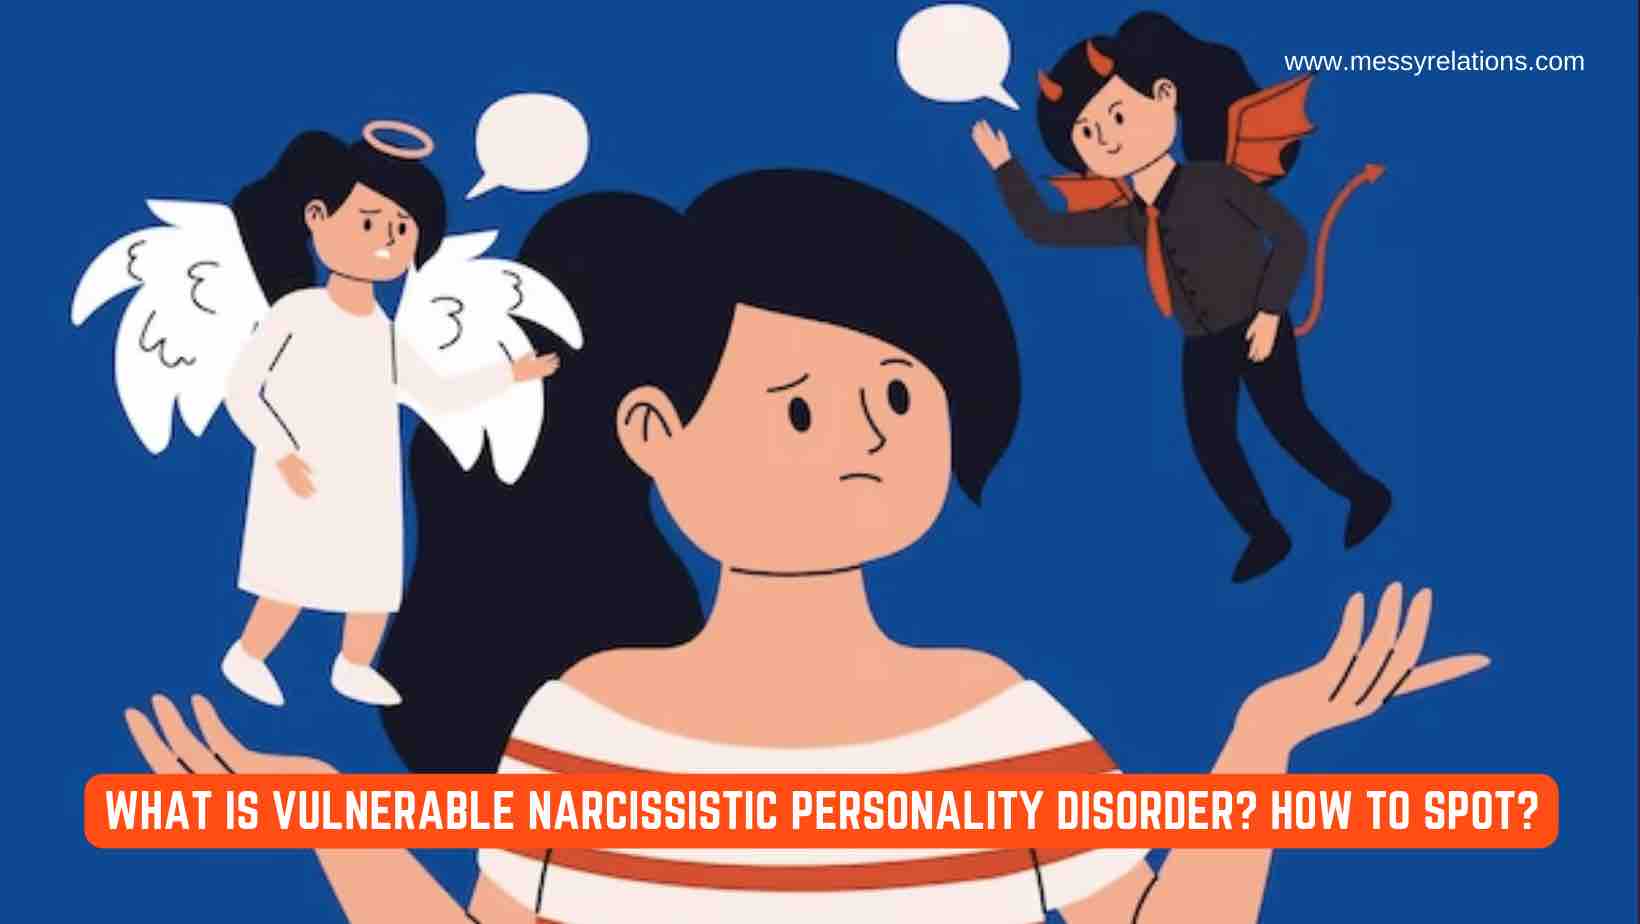 What Is Vulnerable Narcissistic Personality Disorder? How To Spot?